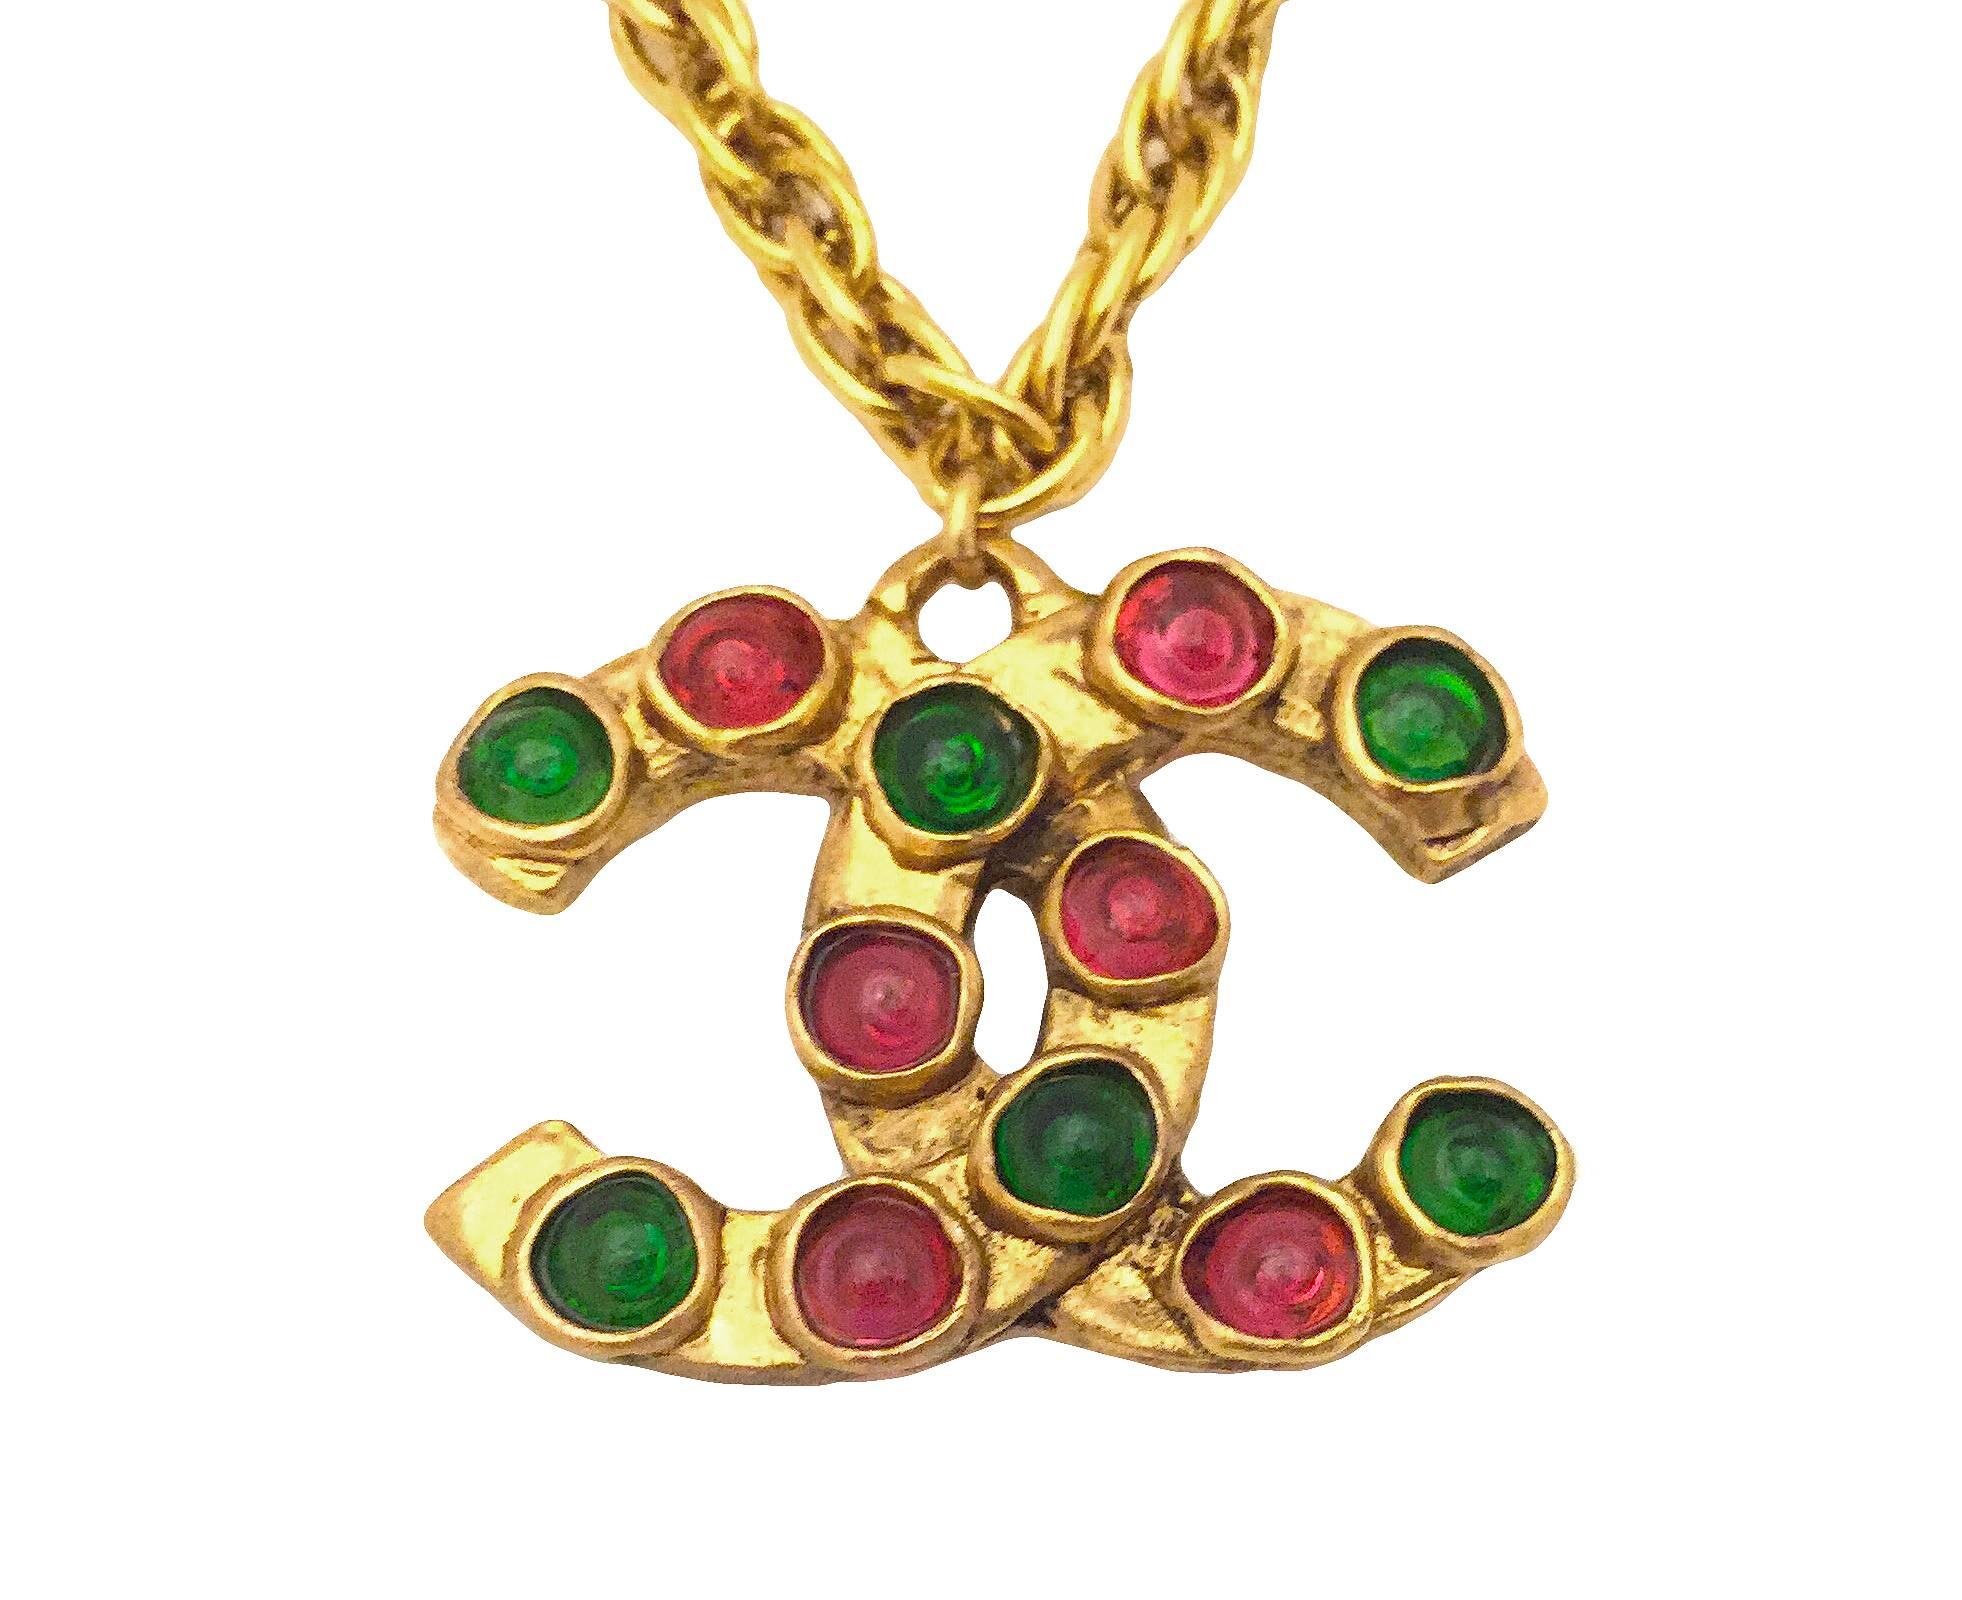 Iconic Chanel vintage gold-tone necklace with a large interlocking CC logo pendant inlaid with red and green gripoix glass stones. Can be worn long or doubled or tripled as a choker. 

Measurements:
Pendant 2